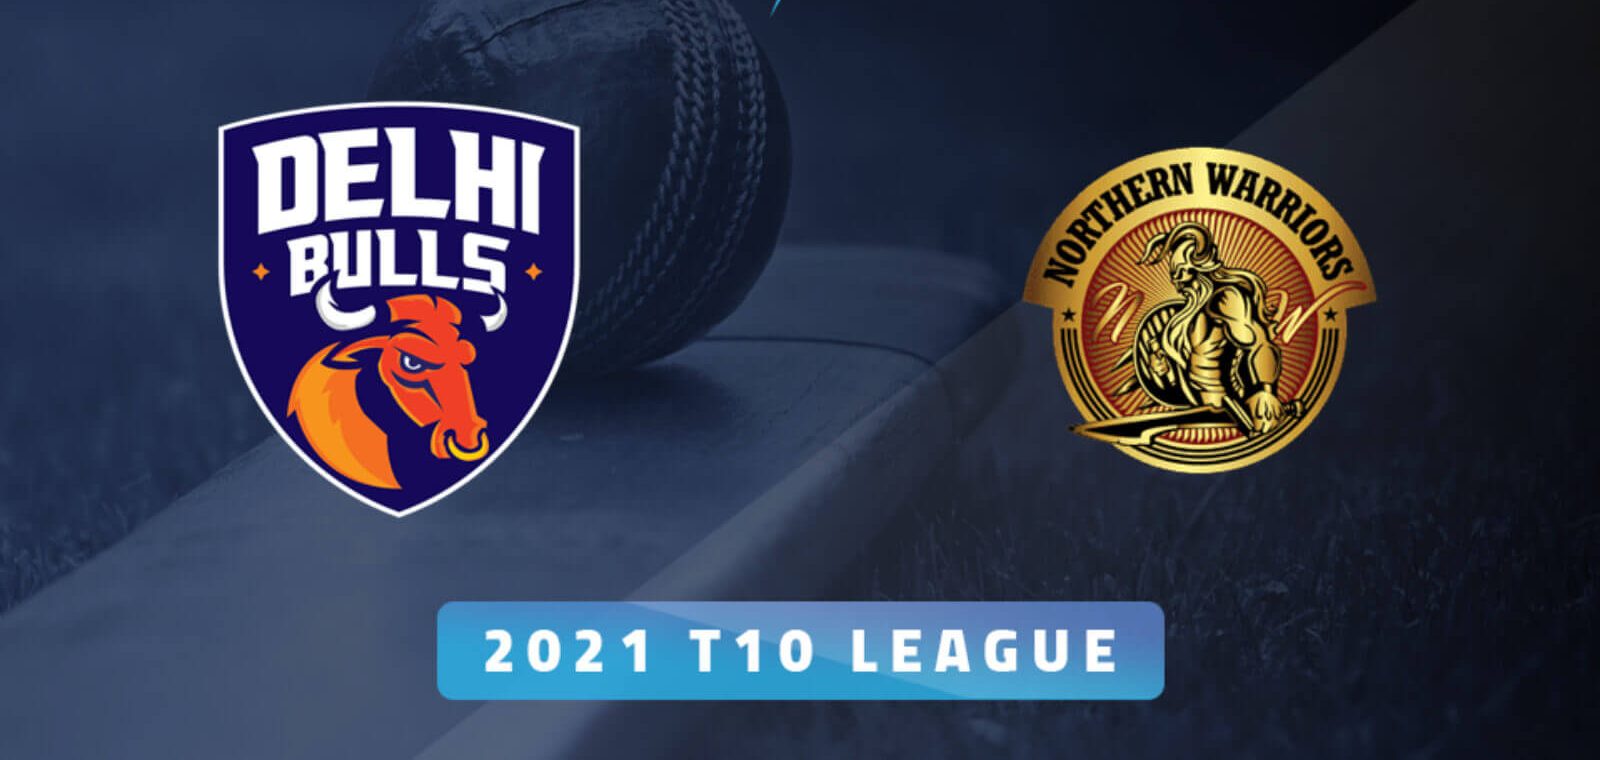 Abu Dhabi T10 LIVE: Preview, Squad News, Head to Head Stats, and Dream11 Prediction for Delhi Bulls vs Northern Warriors